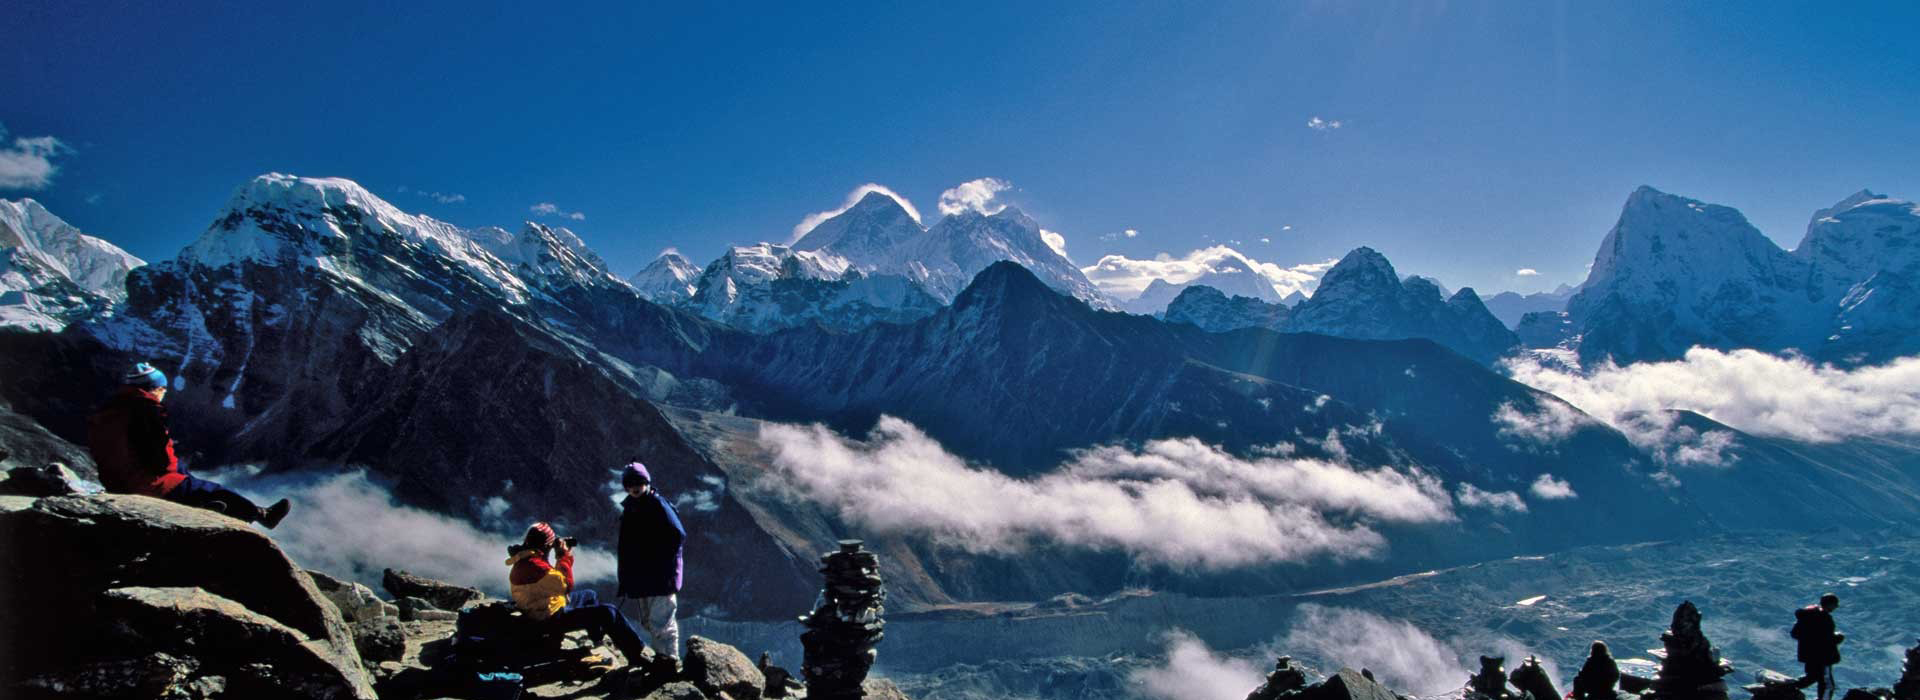 How Difficult is Hiking in Nepal?